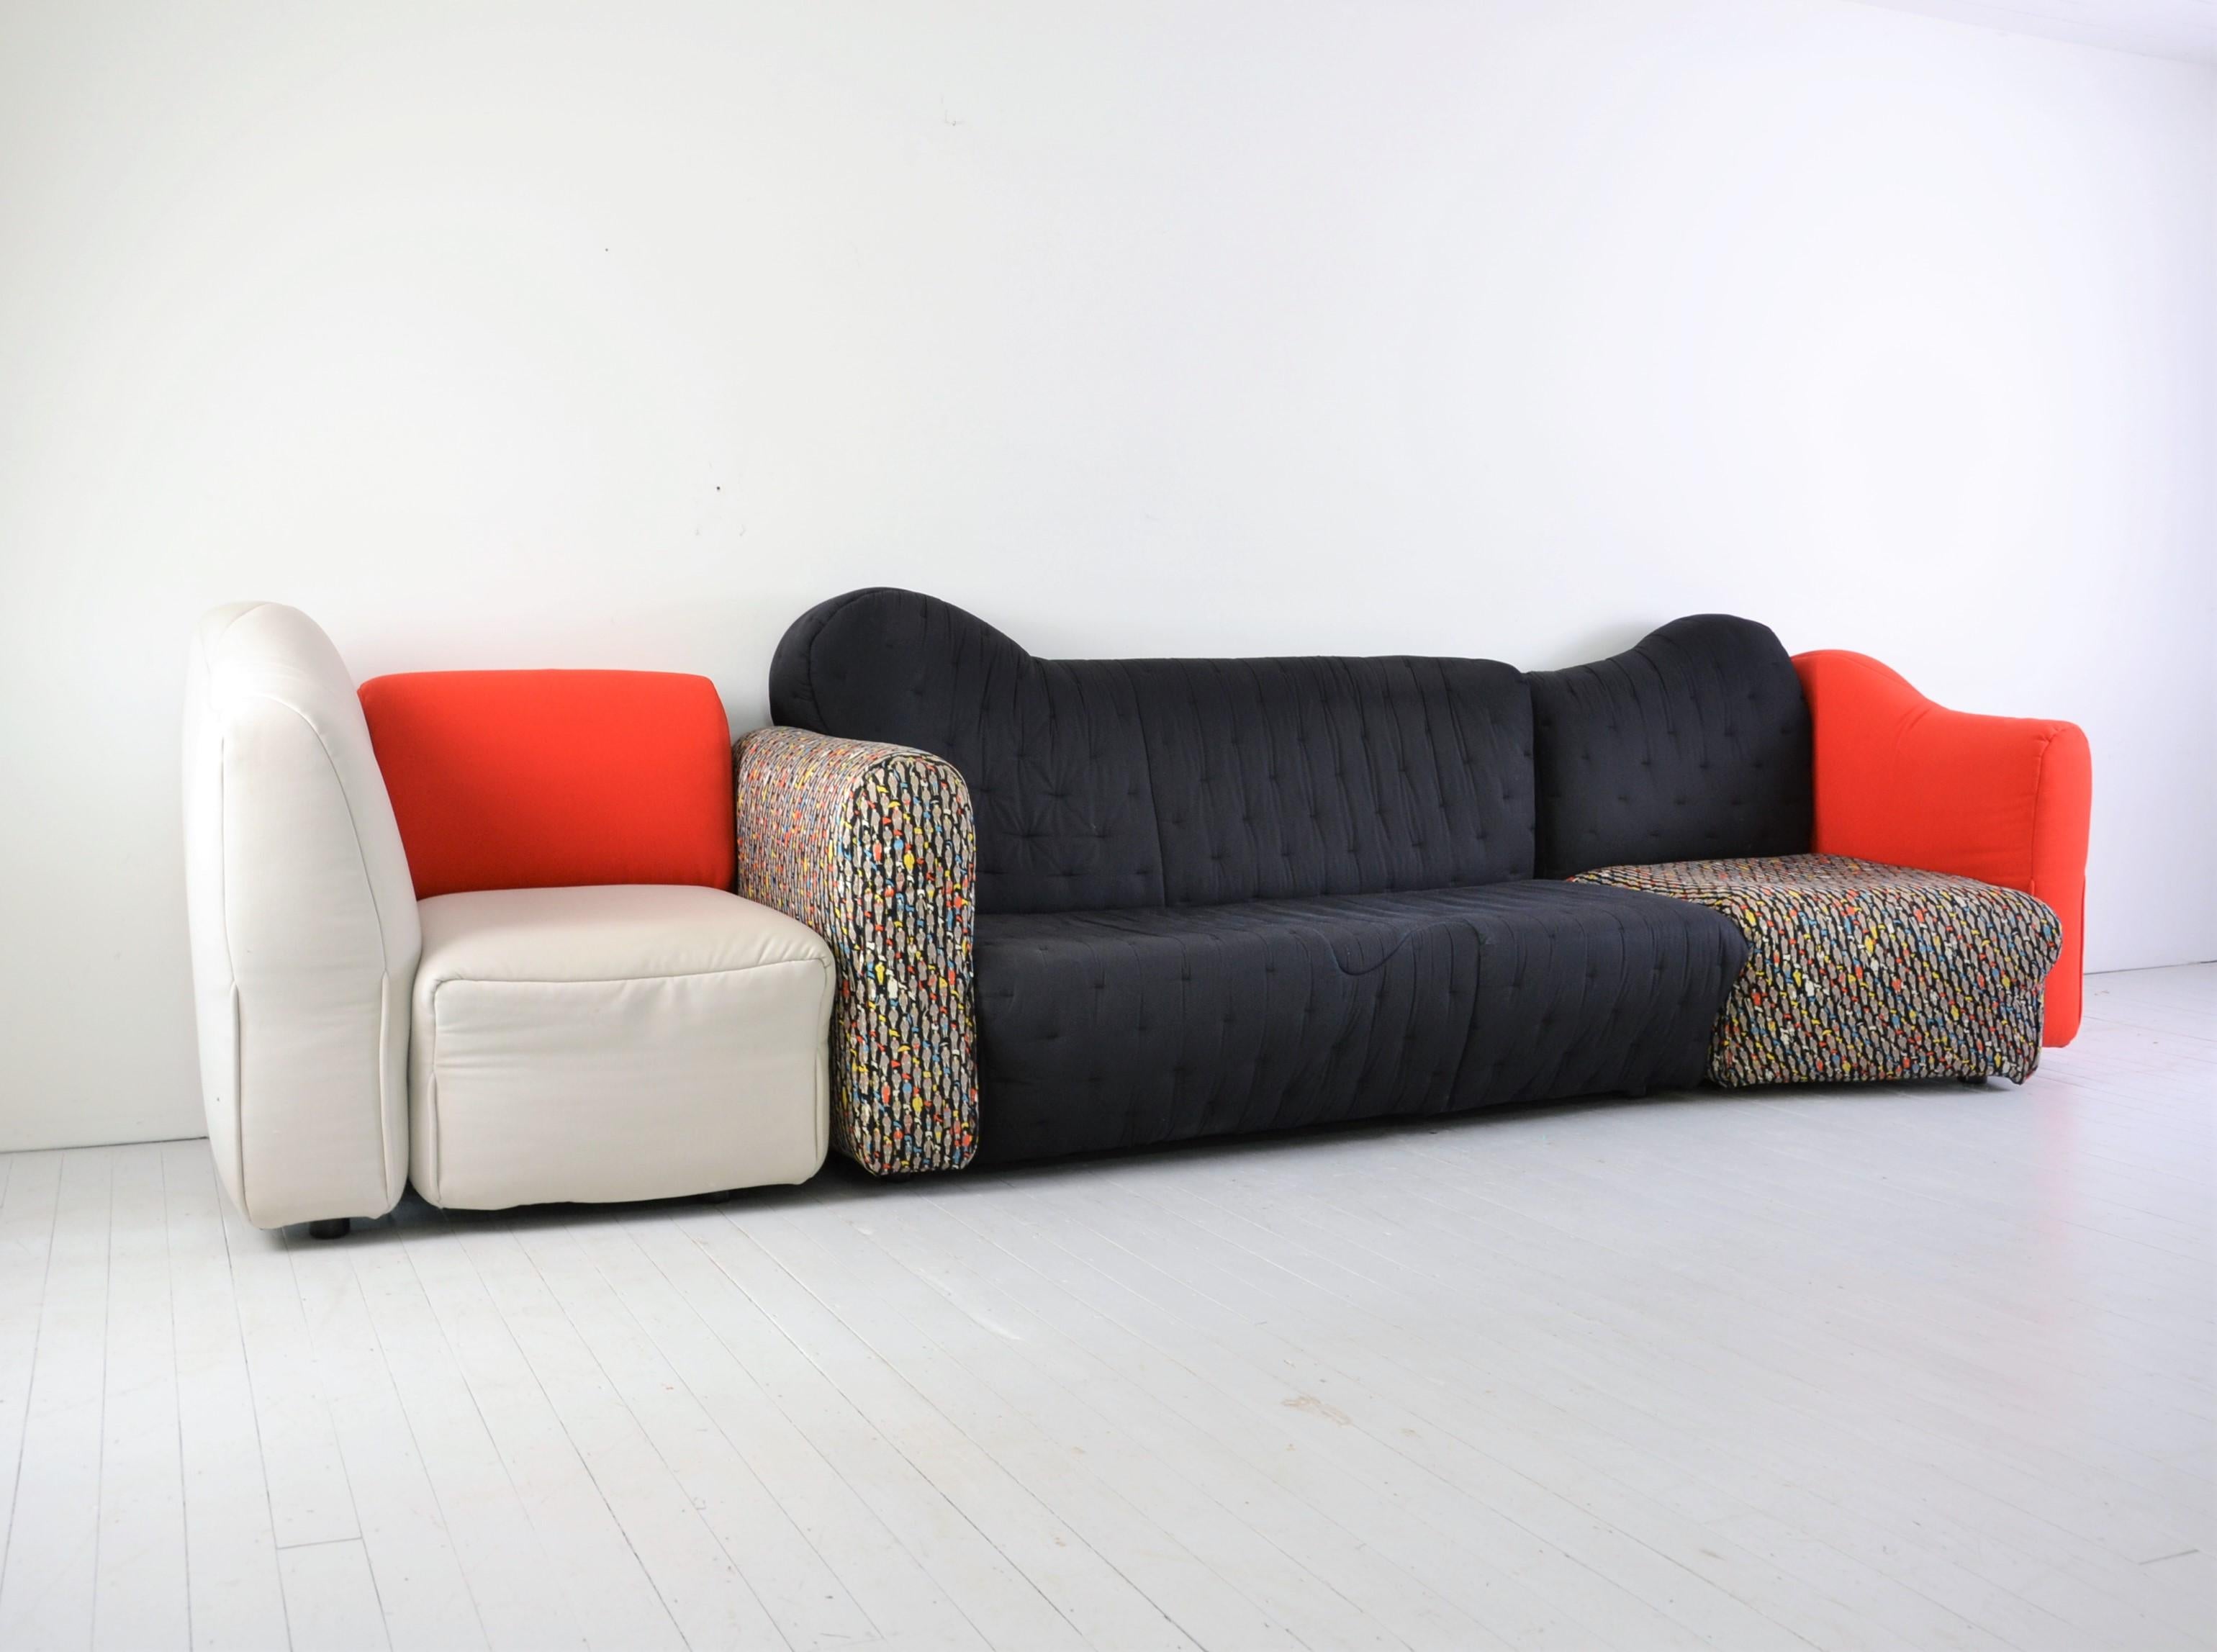 Wonderfull modular sofa by geatano pesce in marvoulous condition and special edition fabric (pattern).